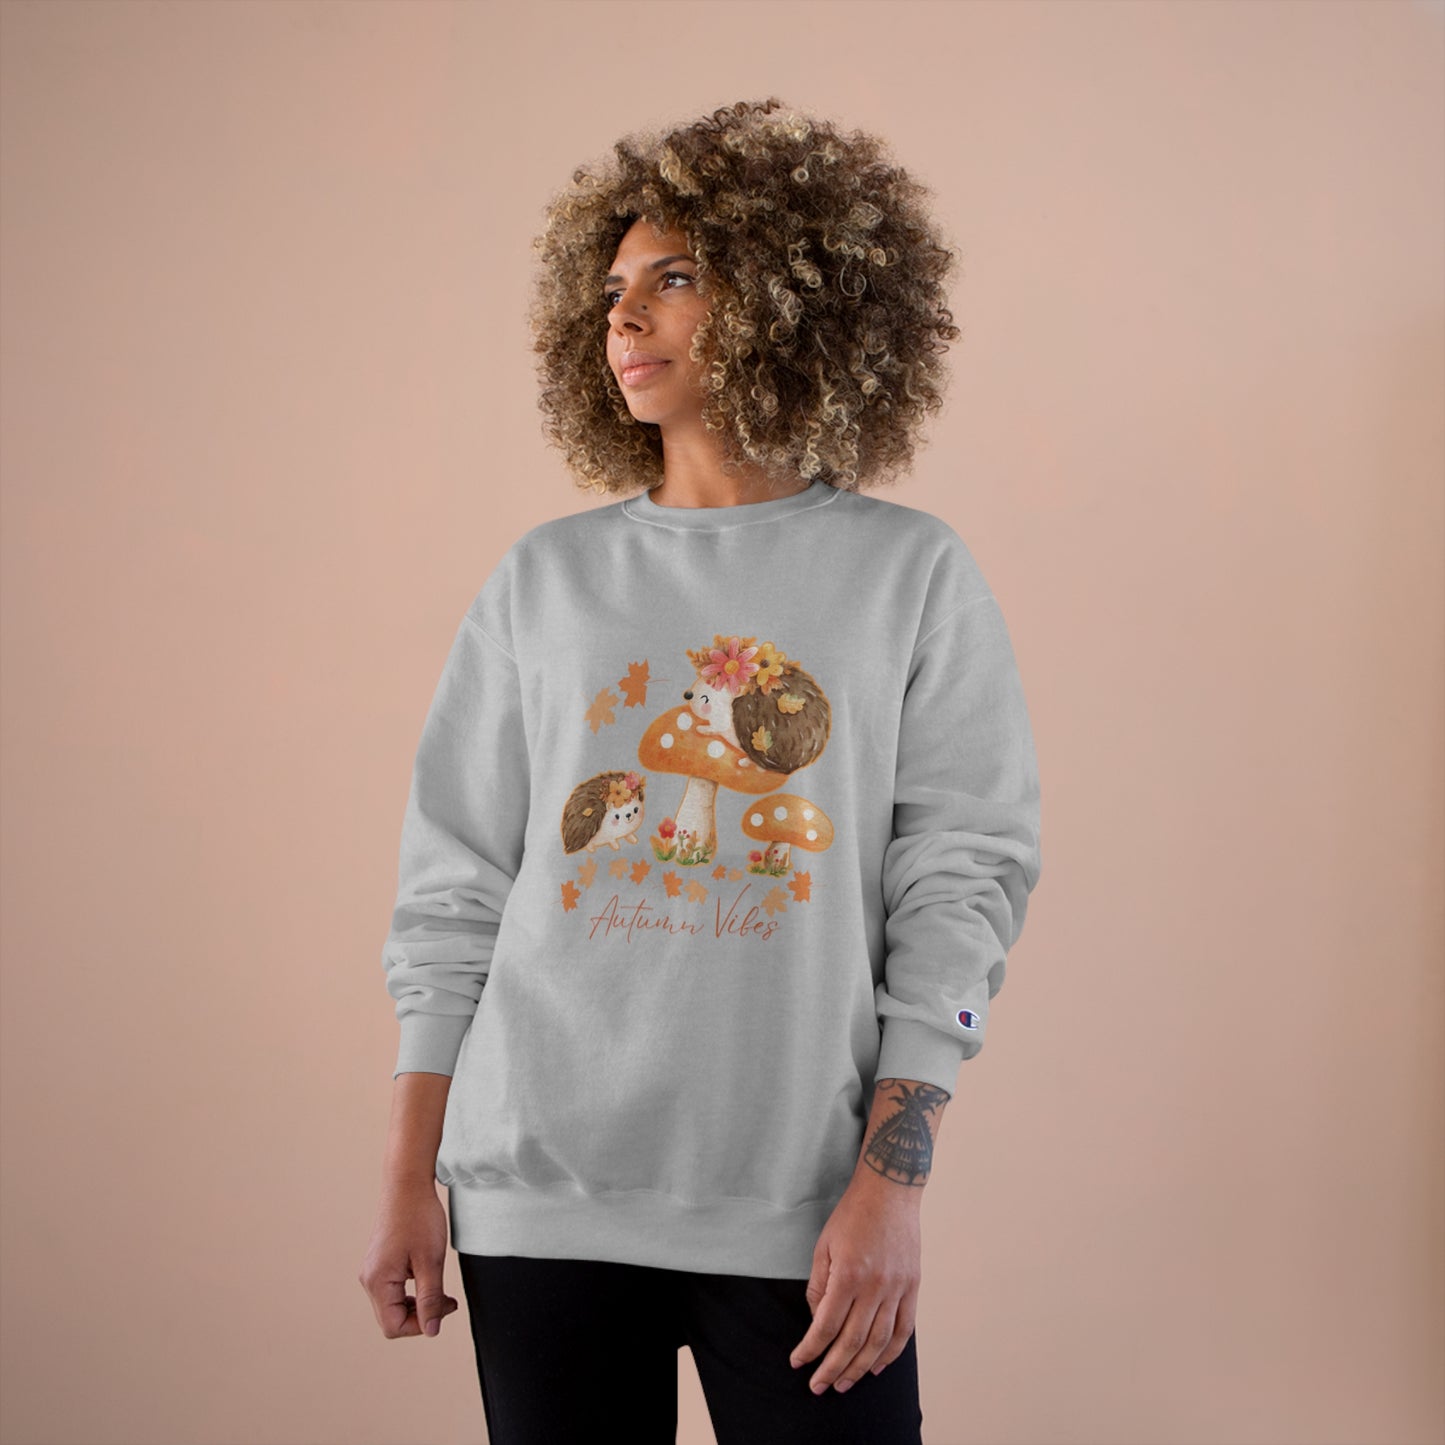 Autumn Vibes - Hedge hogs have all the fun in fall!  Champion Sweatshirt